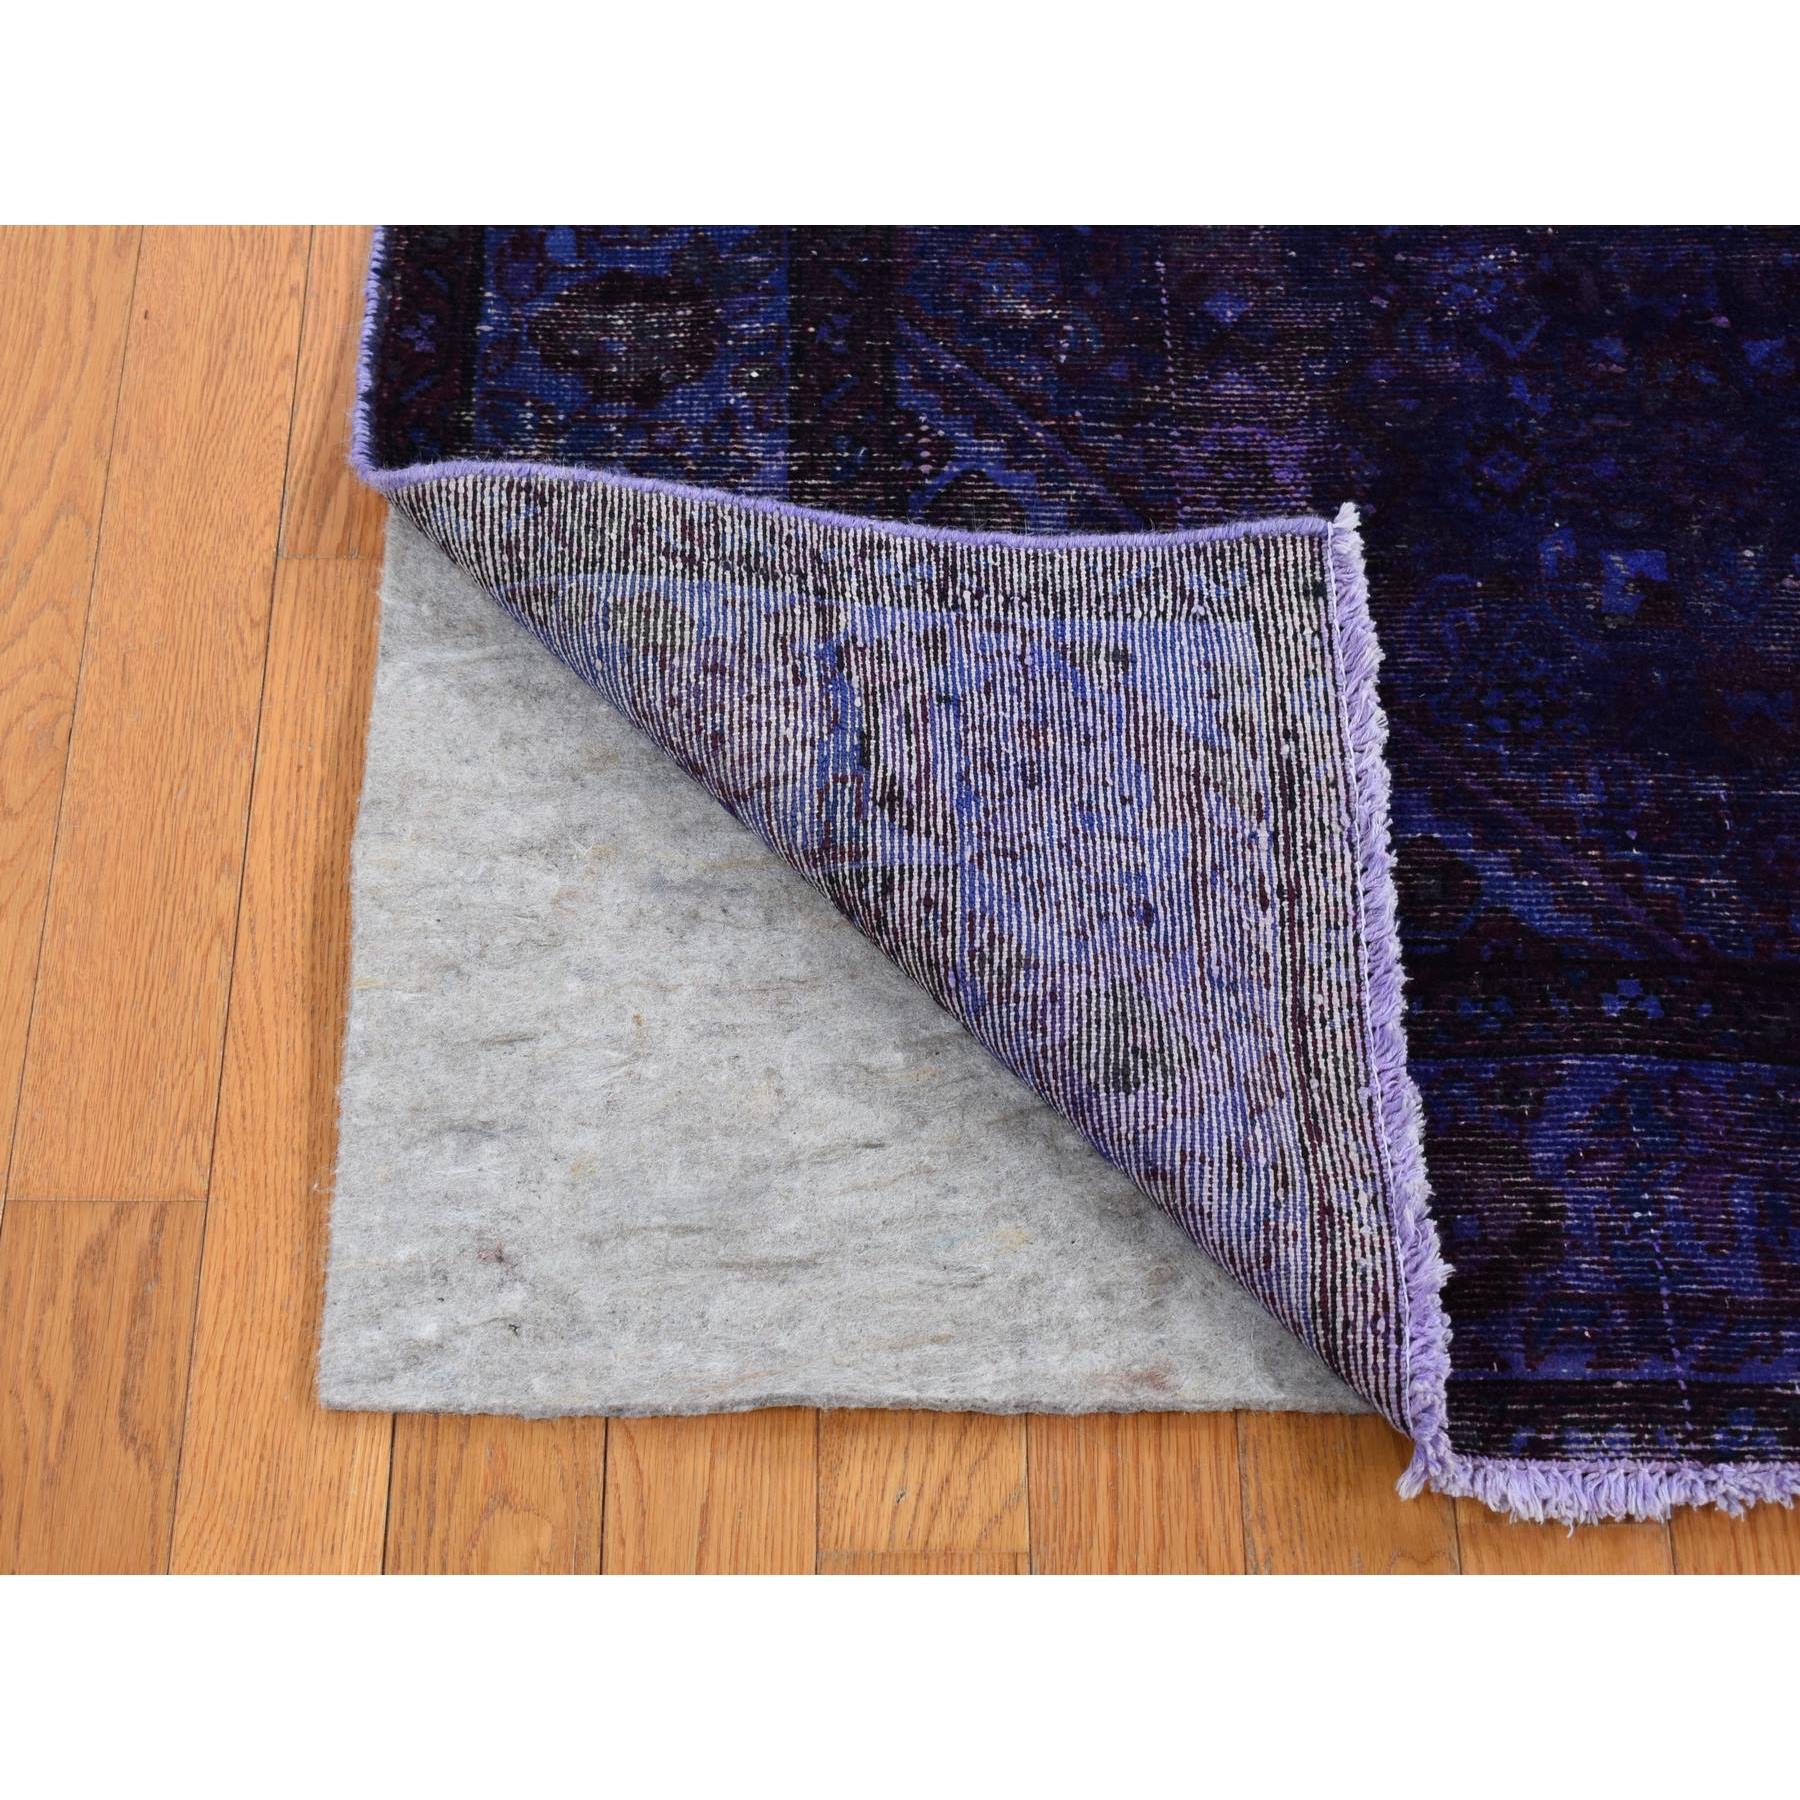  Wool Hand-Knotted Area Rug 5'8